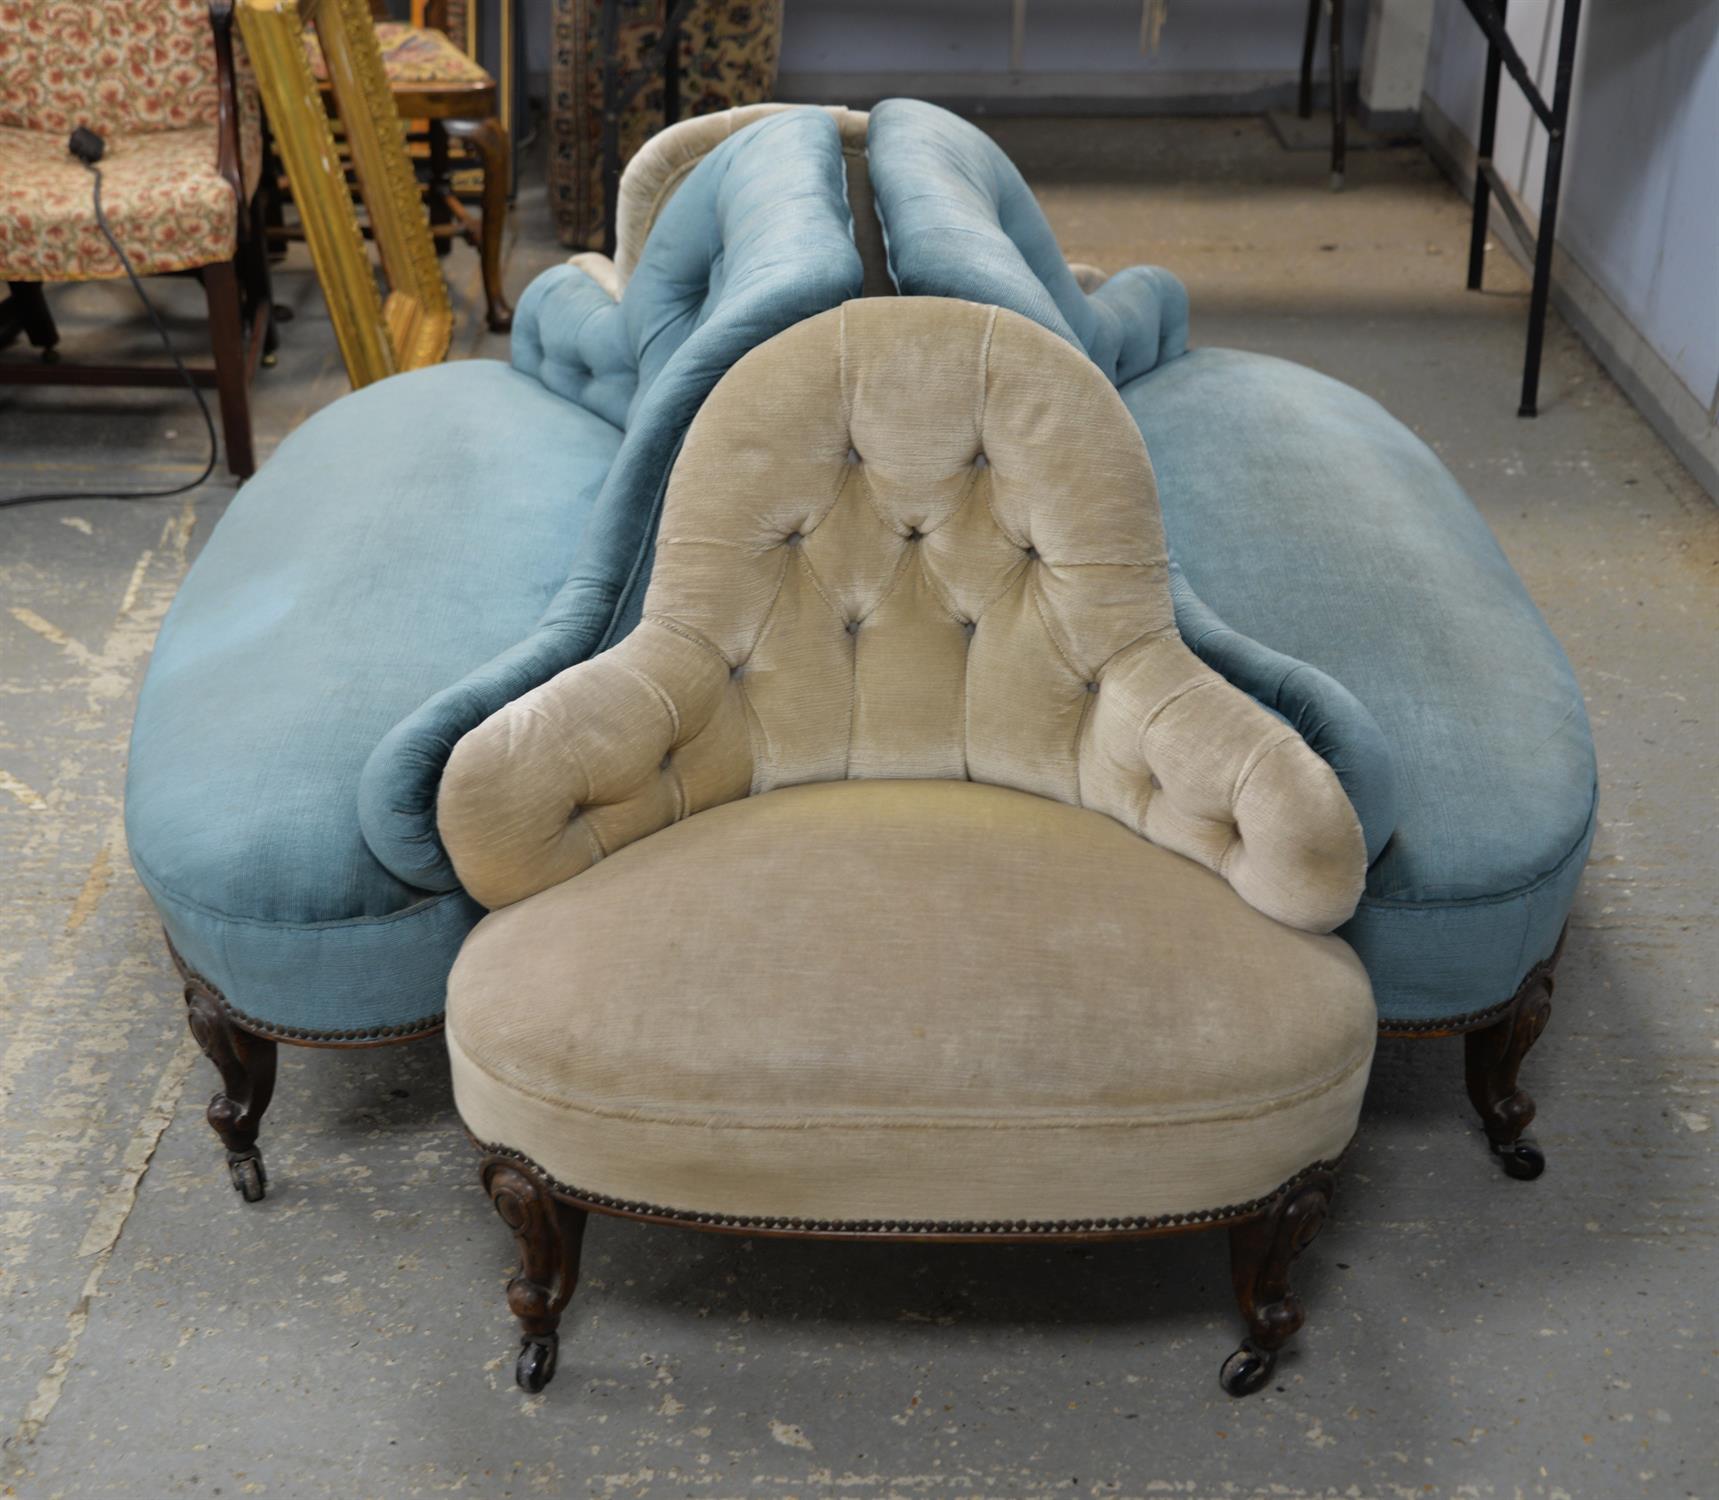 Four piece conversation chair, late 19th Century, with button backs, on curving legs, with casters, - Image 2 of 10